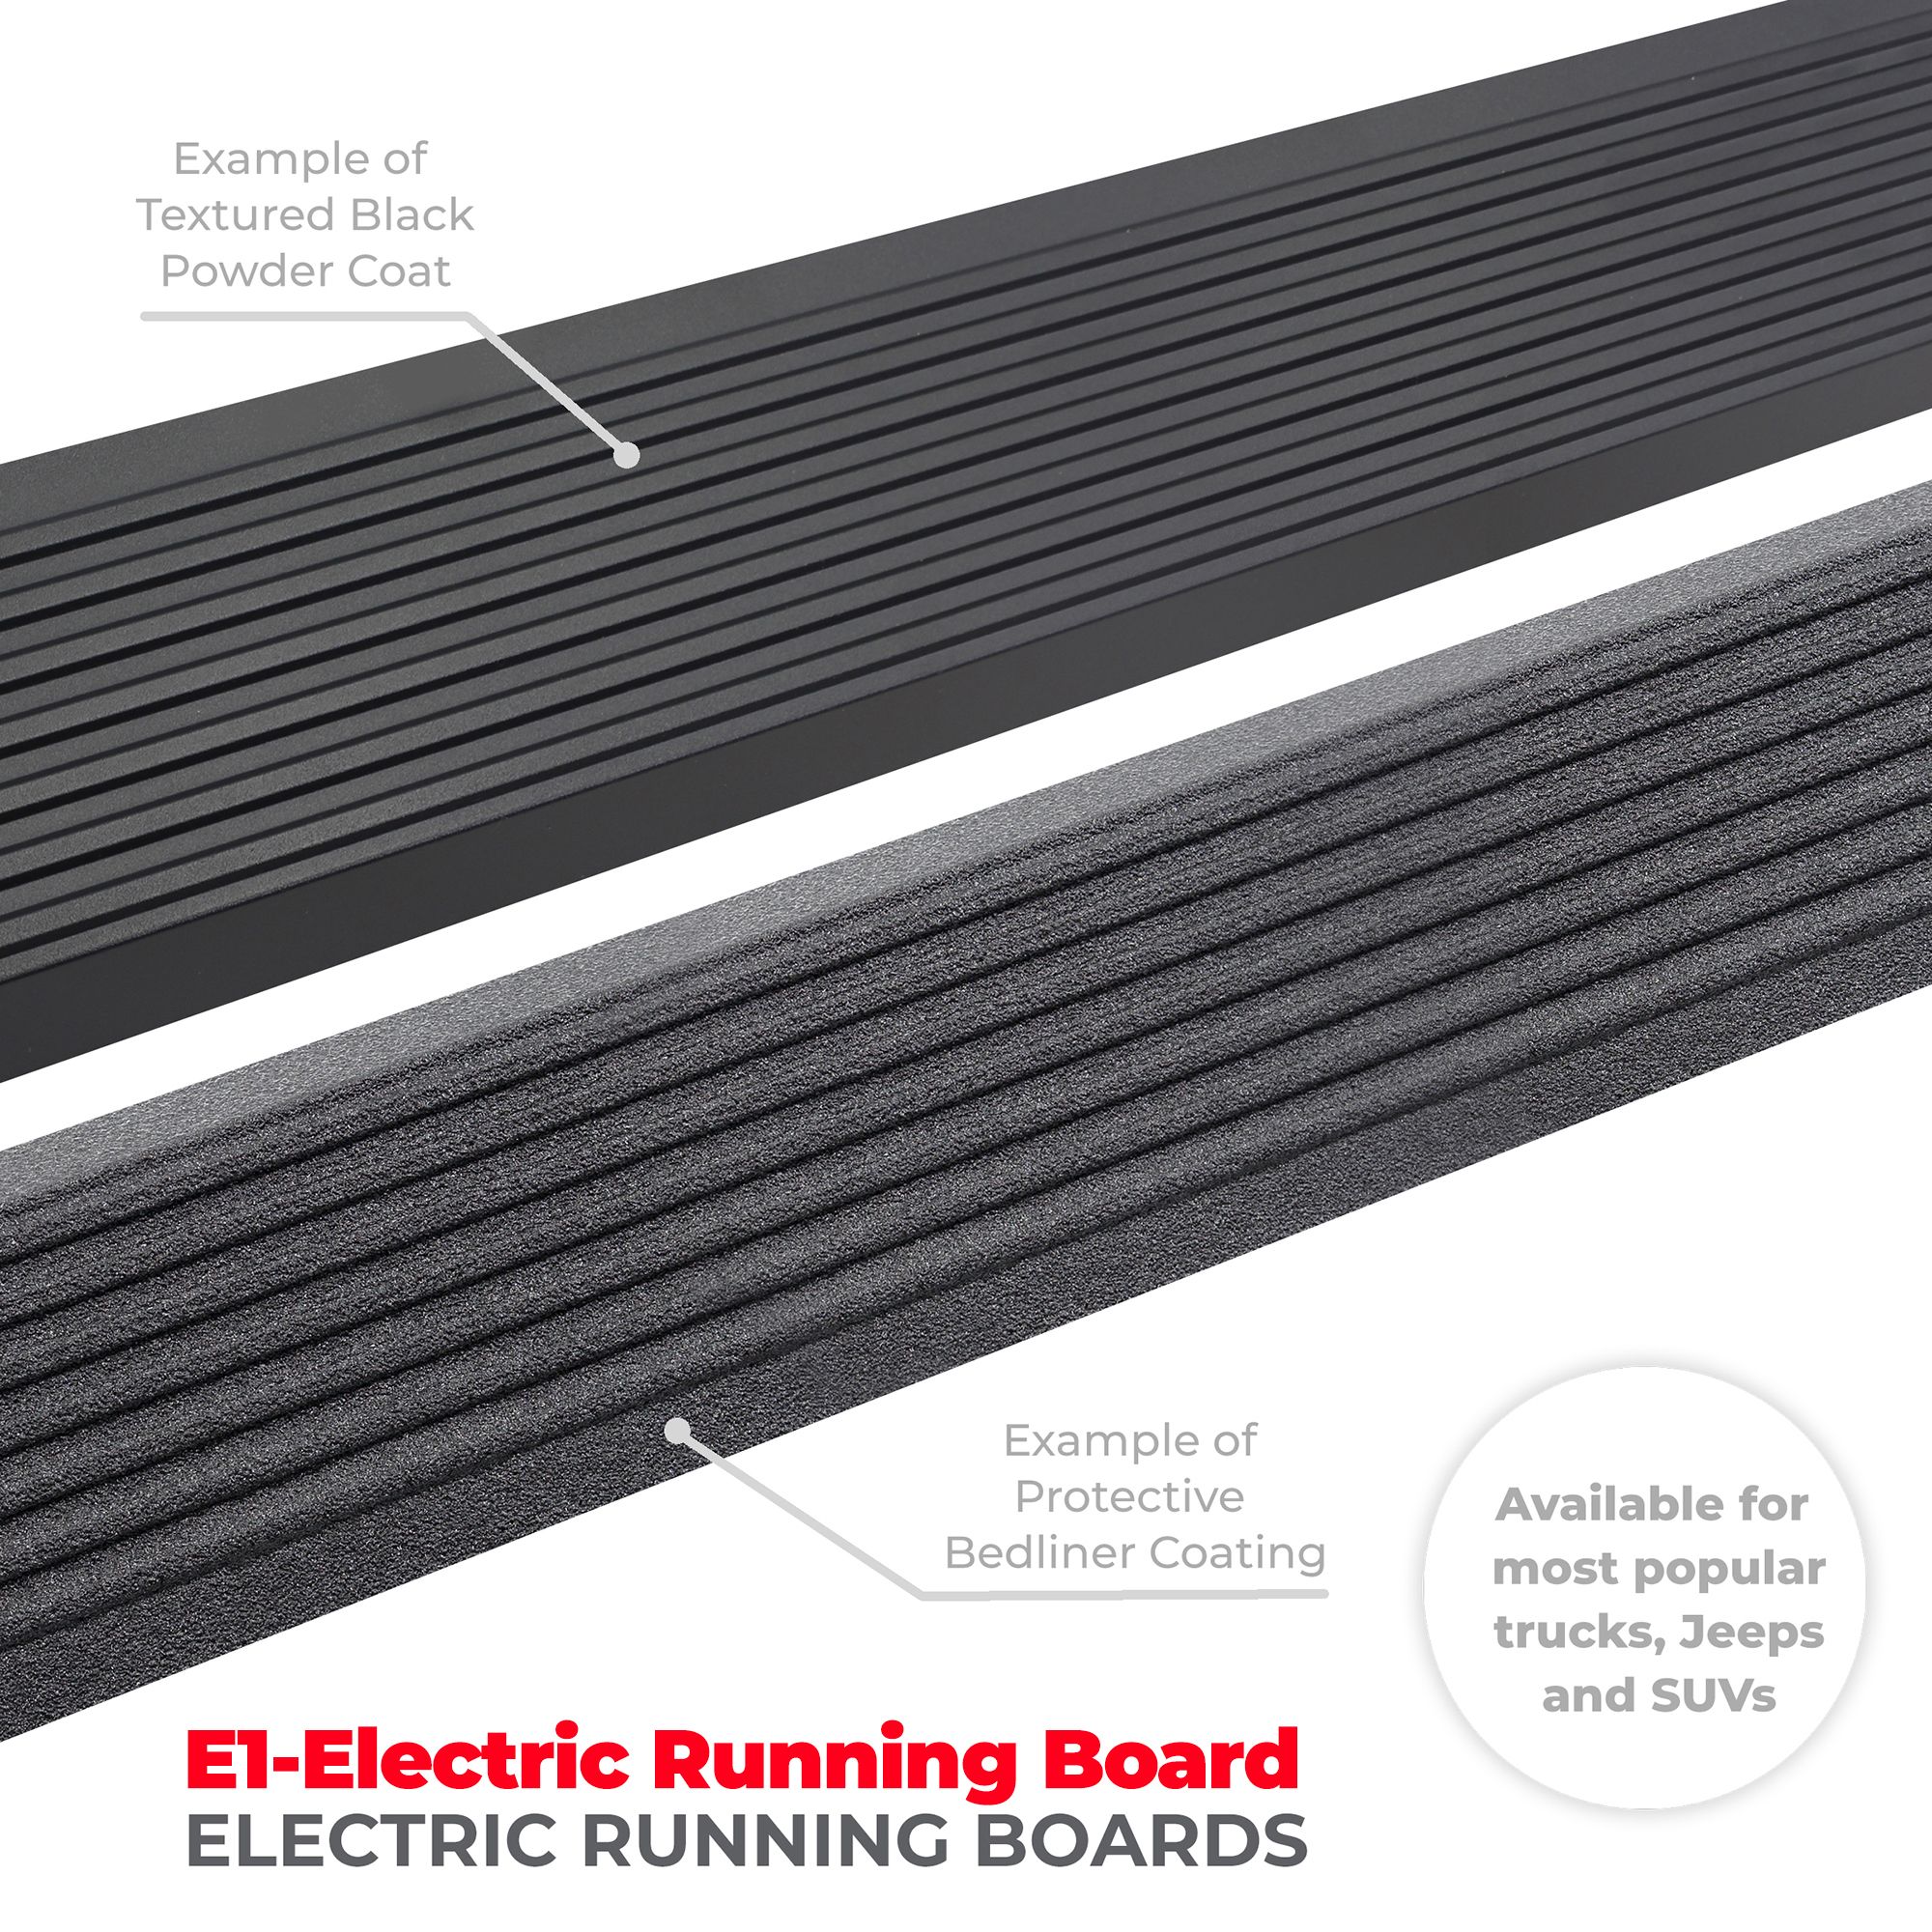 Go Rhino 20404580T - E1 Electric Running Boards With Mounting Brackets - Protective Bedliner Coating